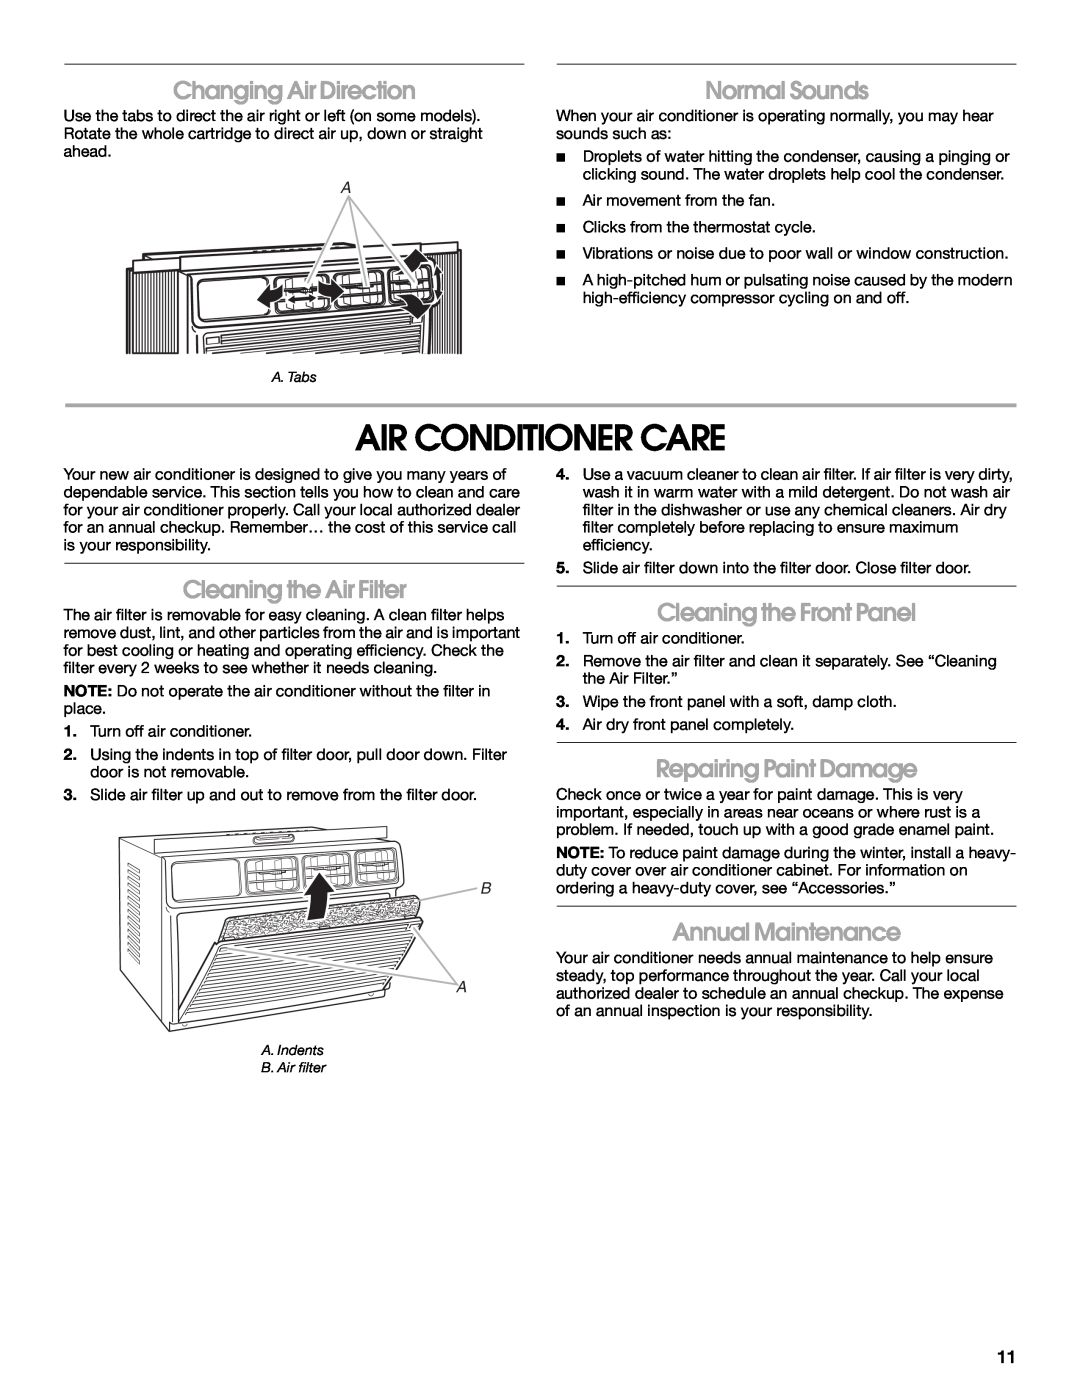 Whirlpool ACE082XR0 manual Air Conditioner Care, Changing Air Direction, Normal Sounds, Cleaning the Air Filter 